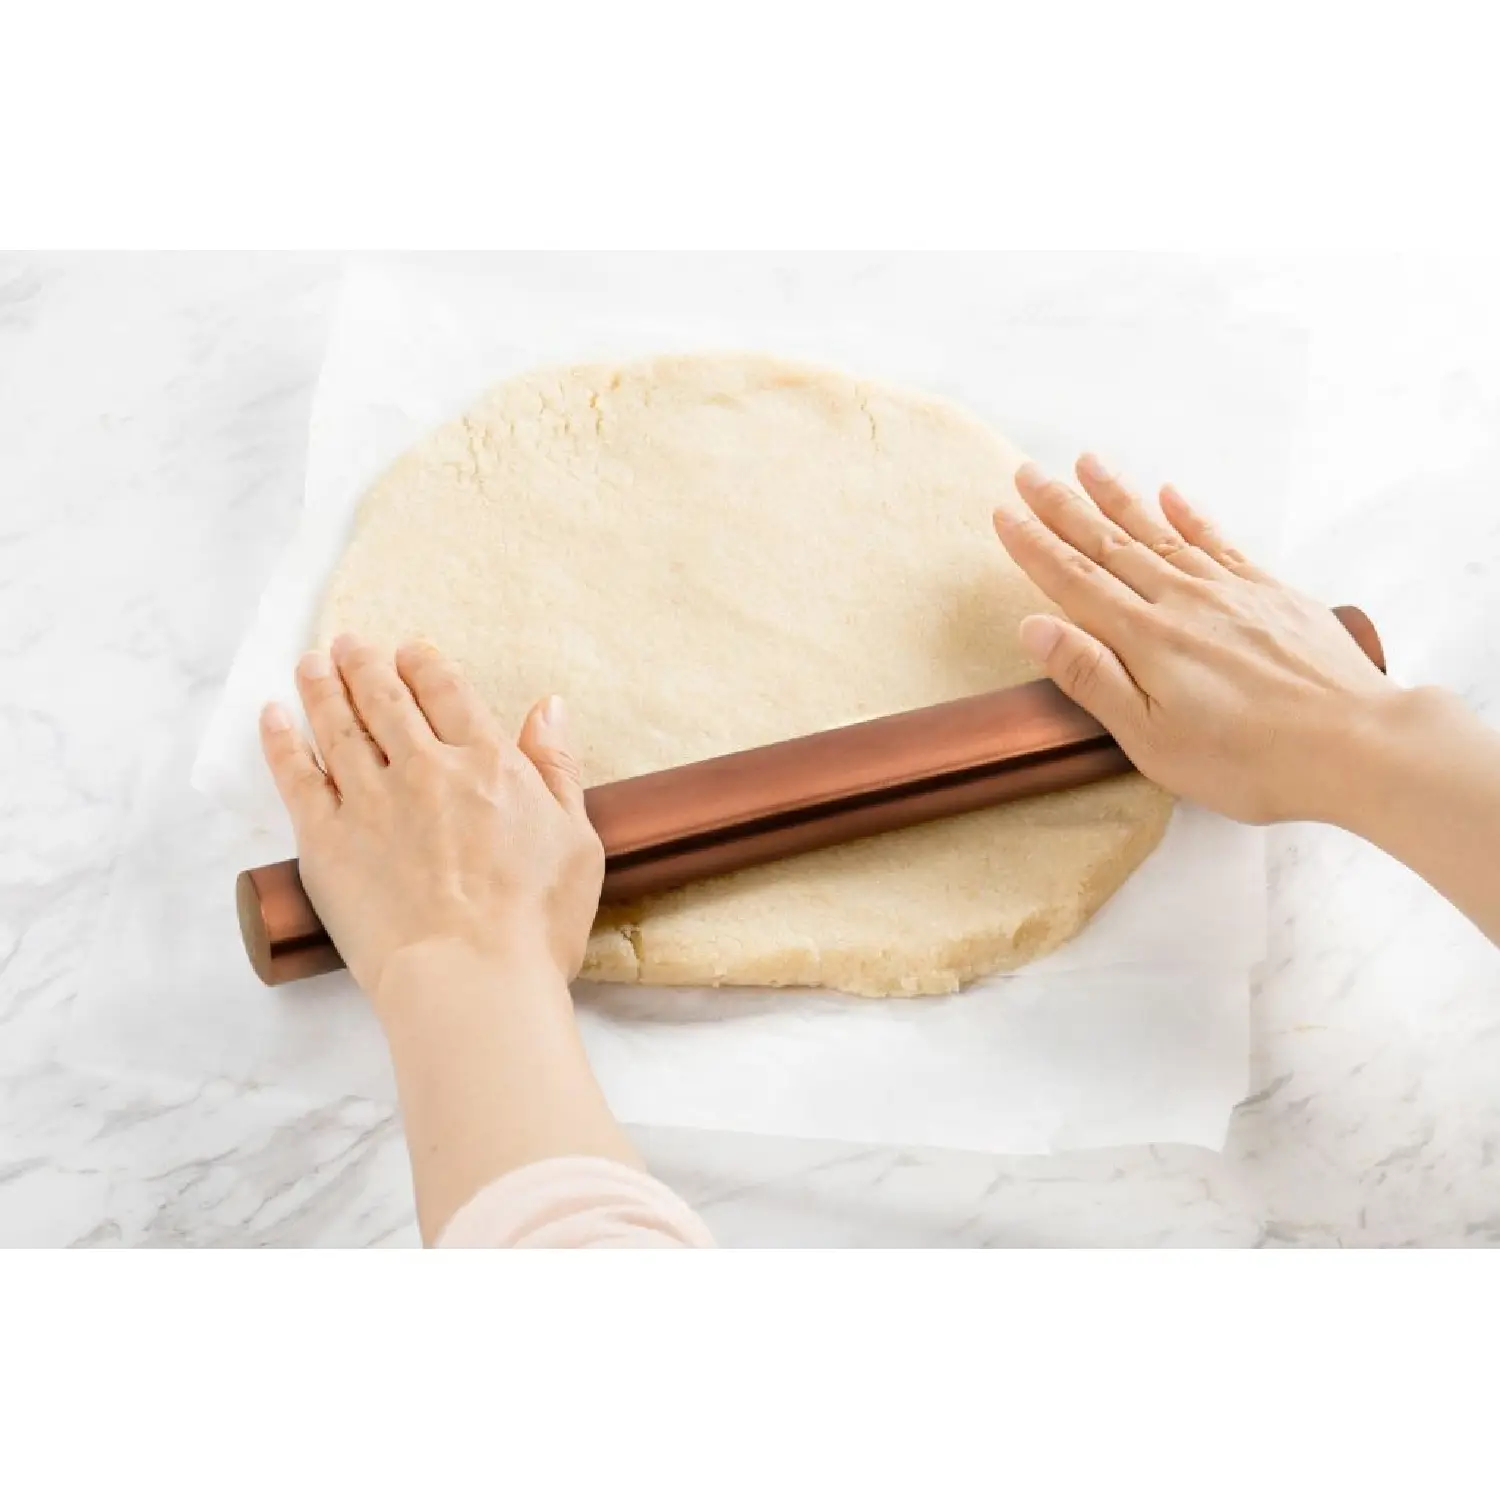 Zulay Kitchen Stainless Steel Rolling Pin - Copper